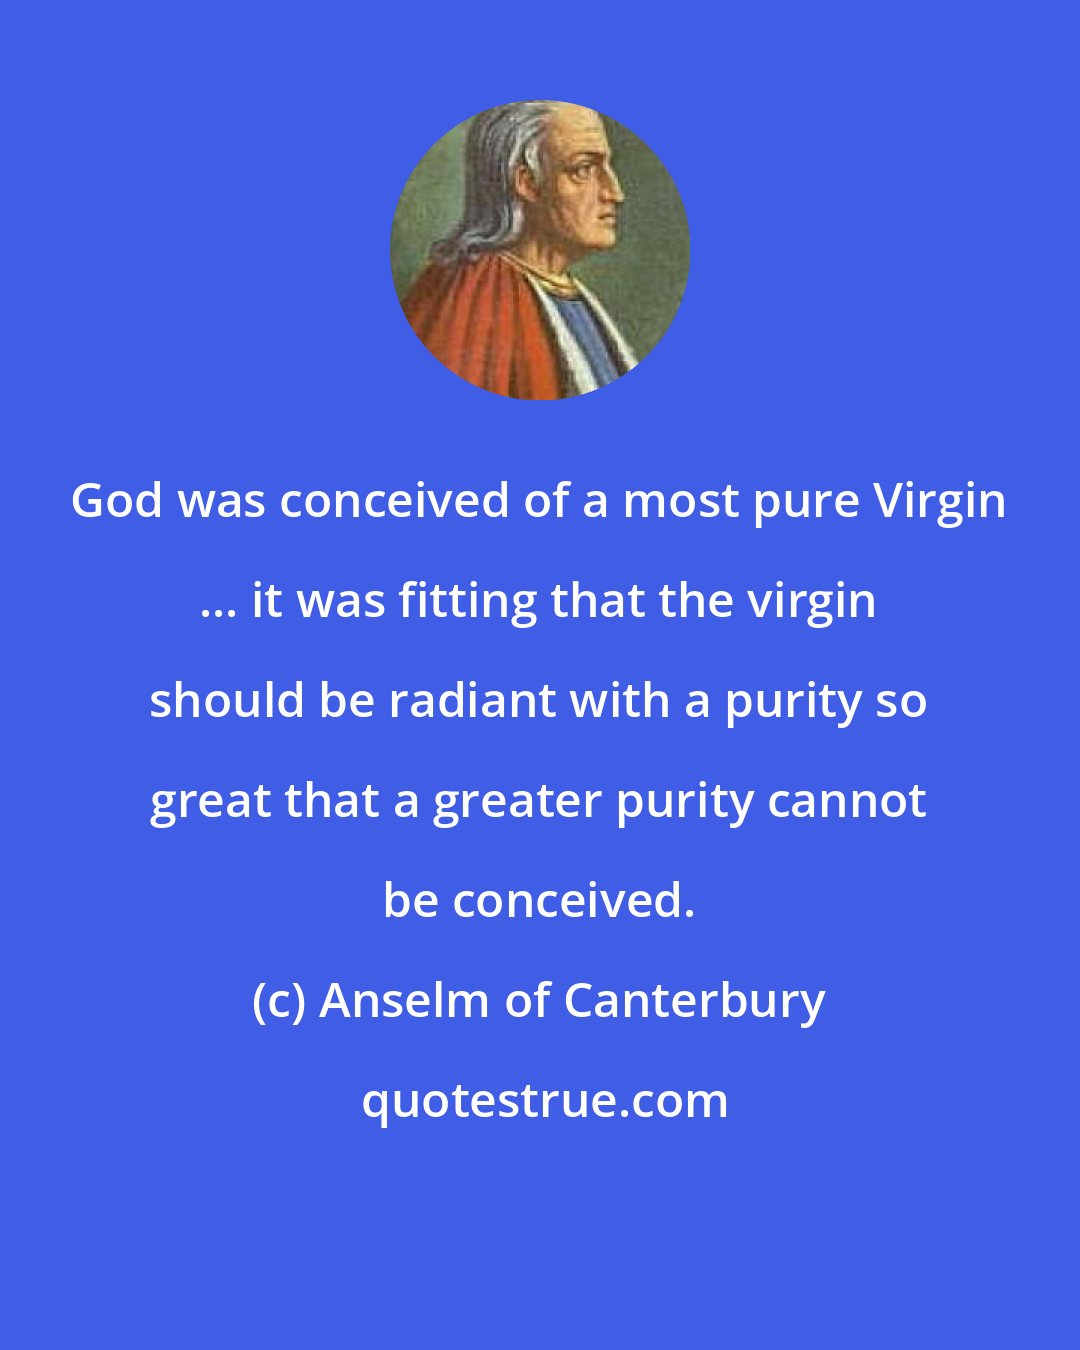 Anselm of Canterbury: God was conceived of a most pure Virgin ... it was fitting that the virgin should be radiant with a purity so great that a greater purity cannot be conceived.